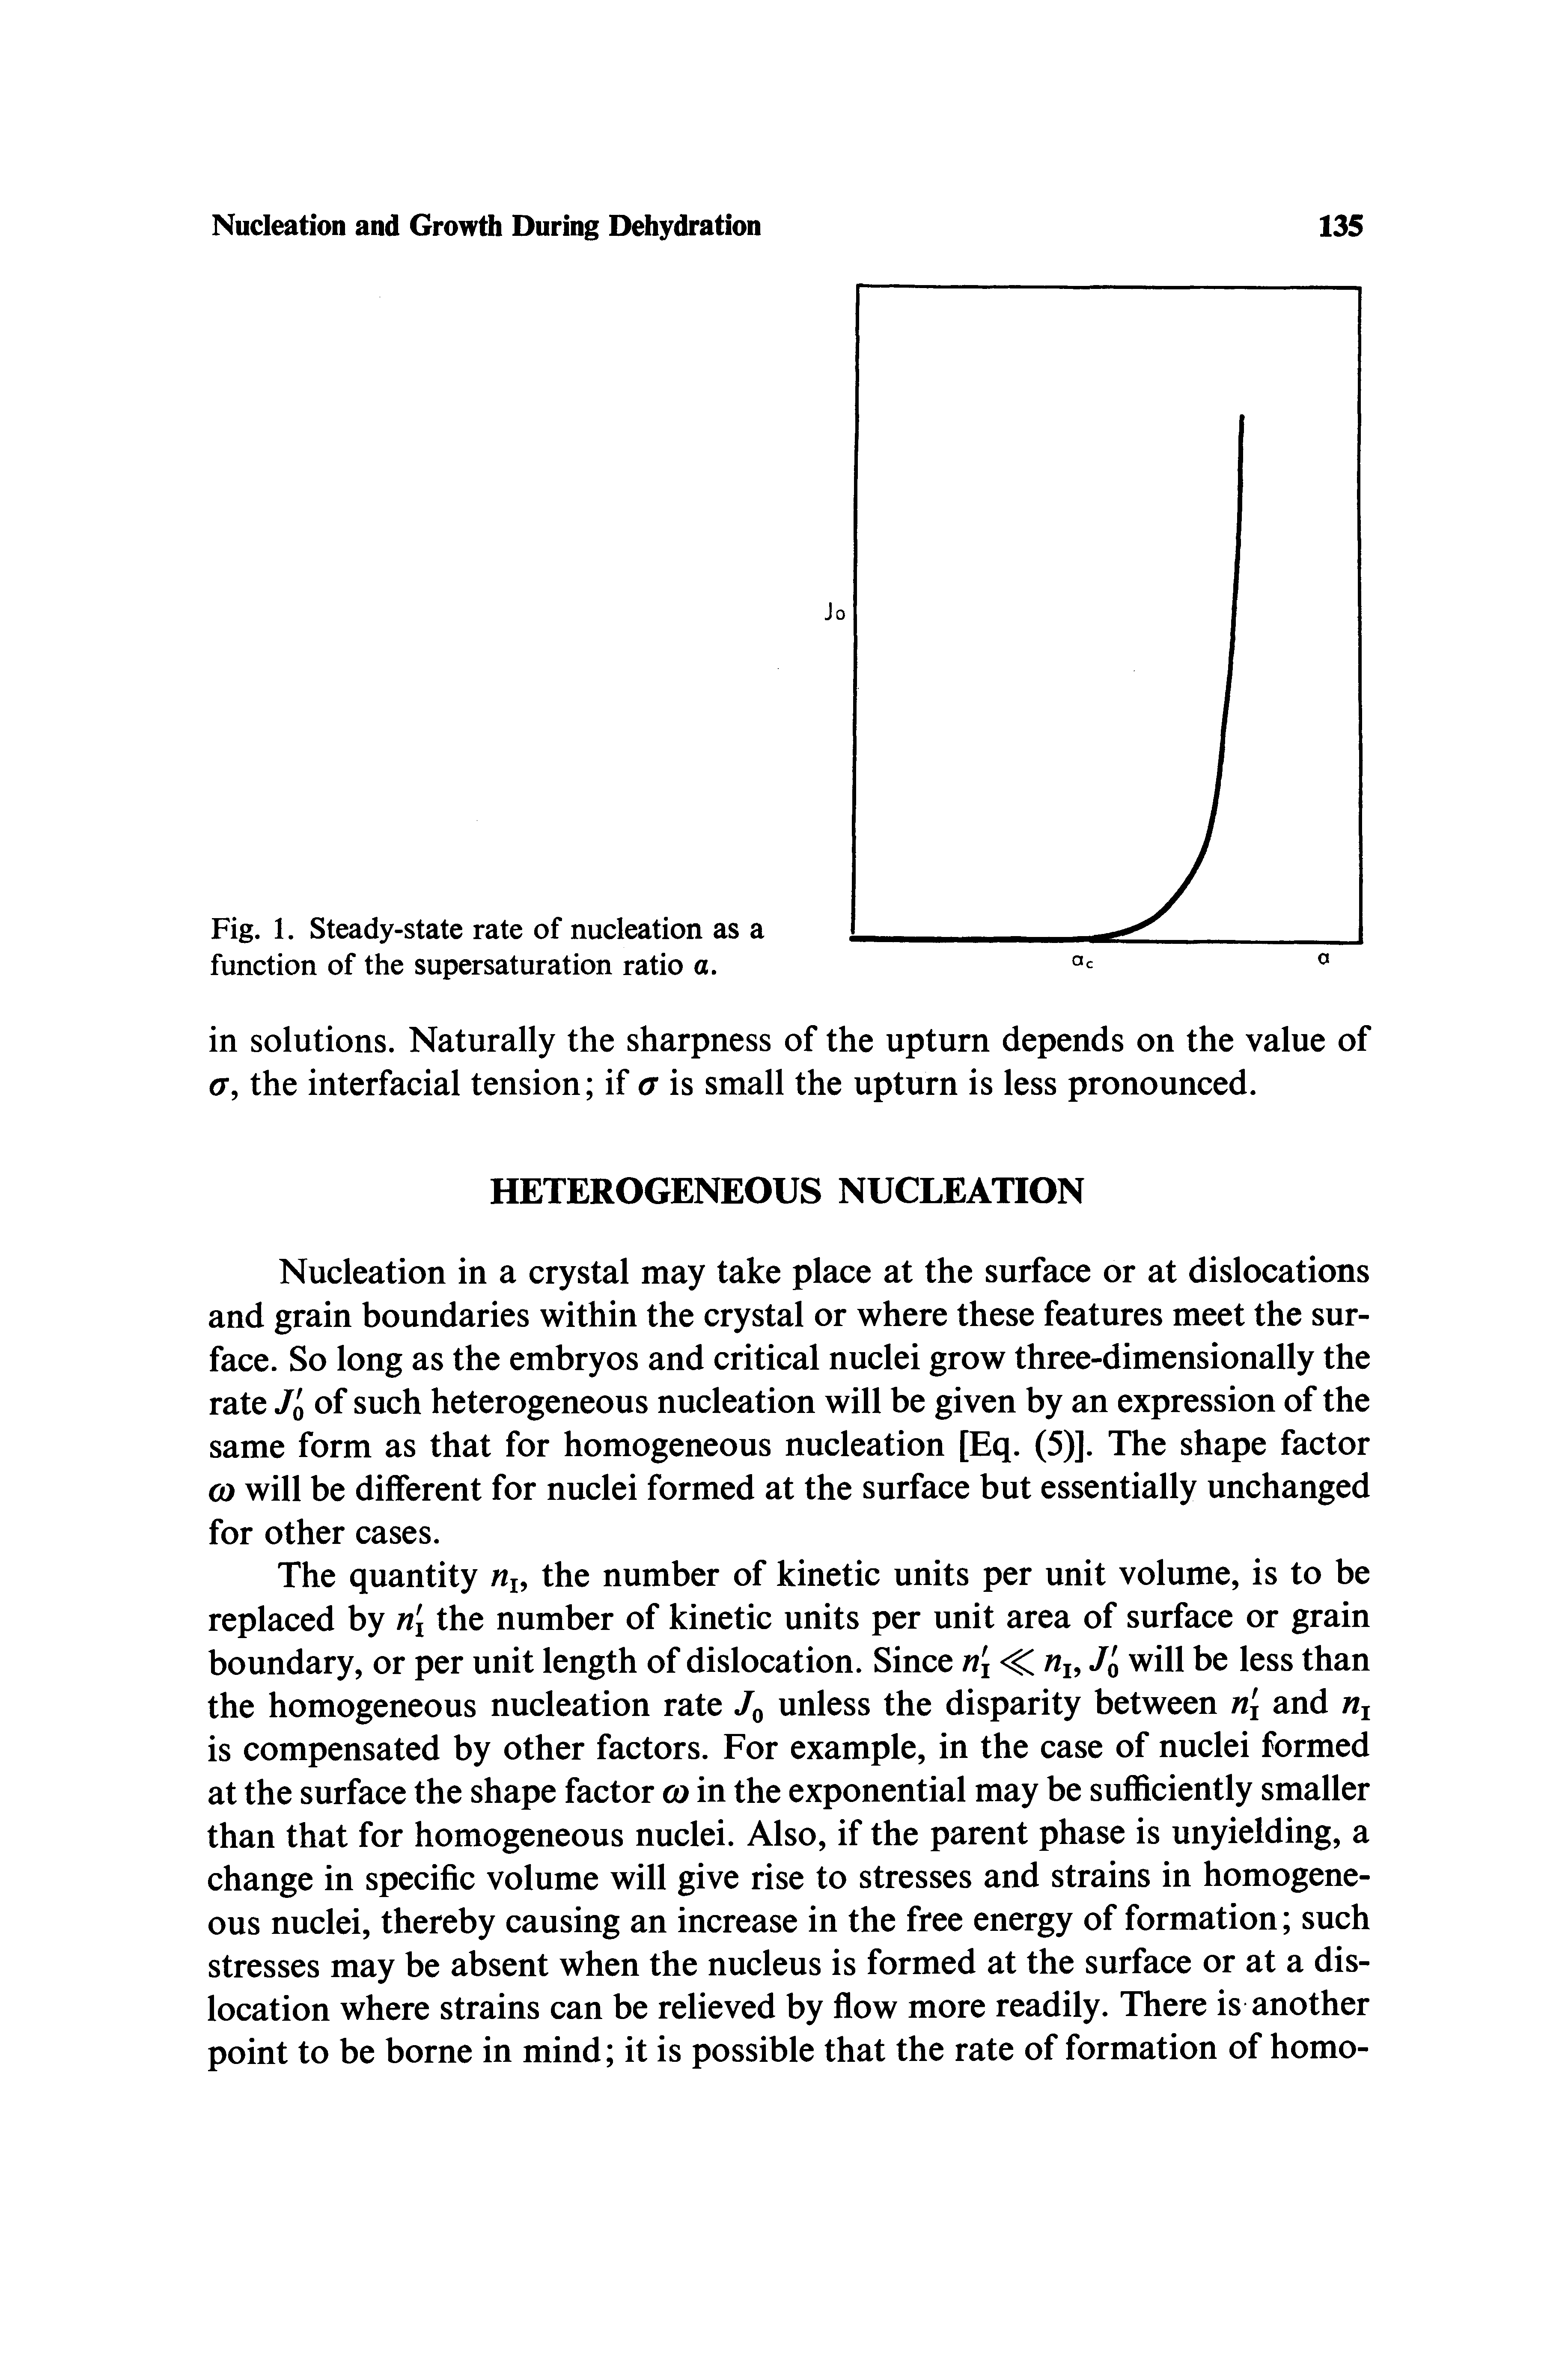 Fig. 1. Steady-state rate of nucleation as a function of the supersaturation ratio a.